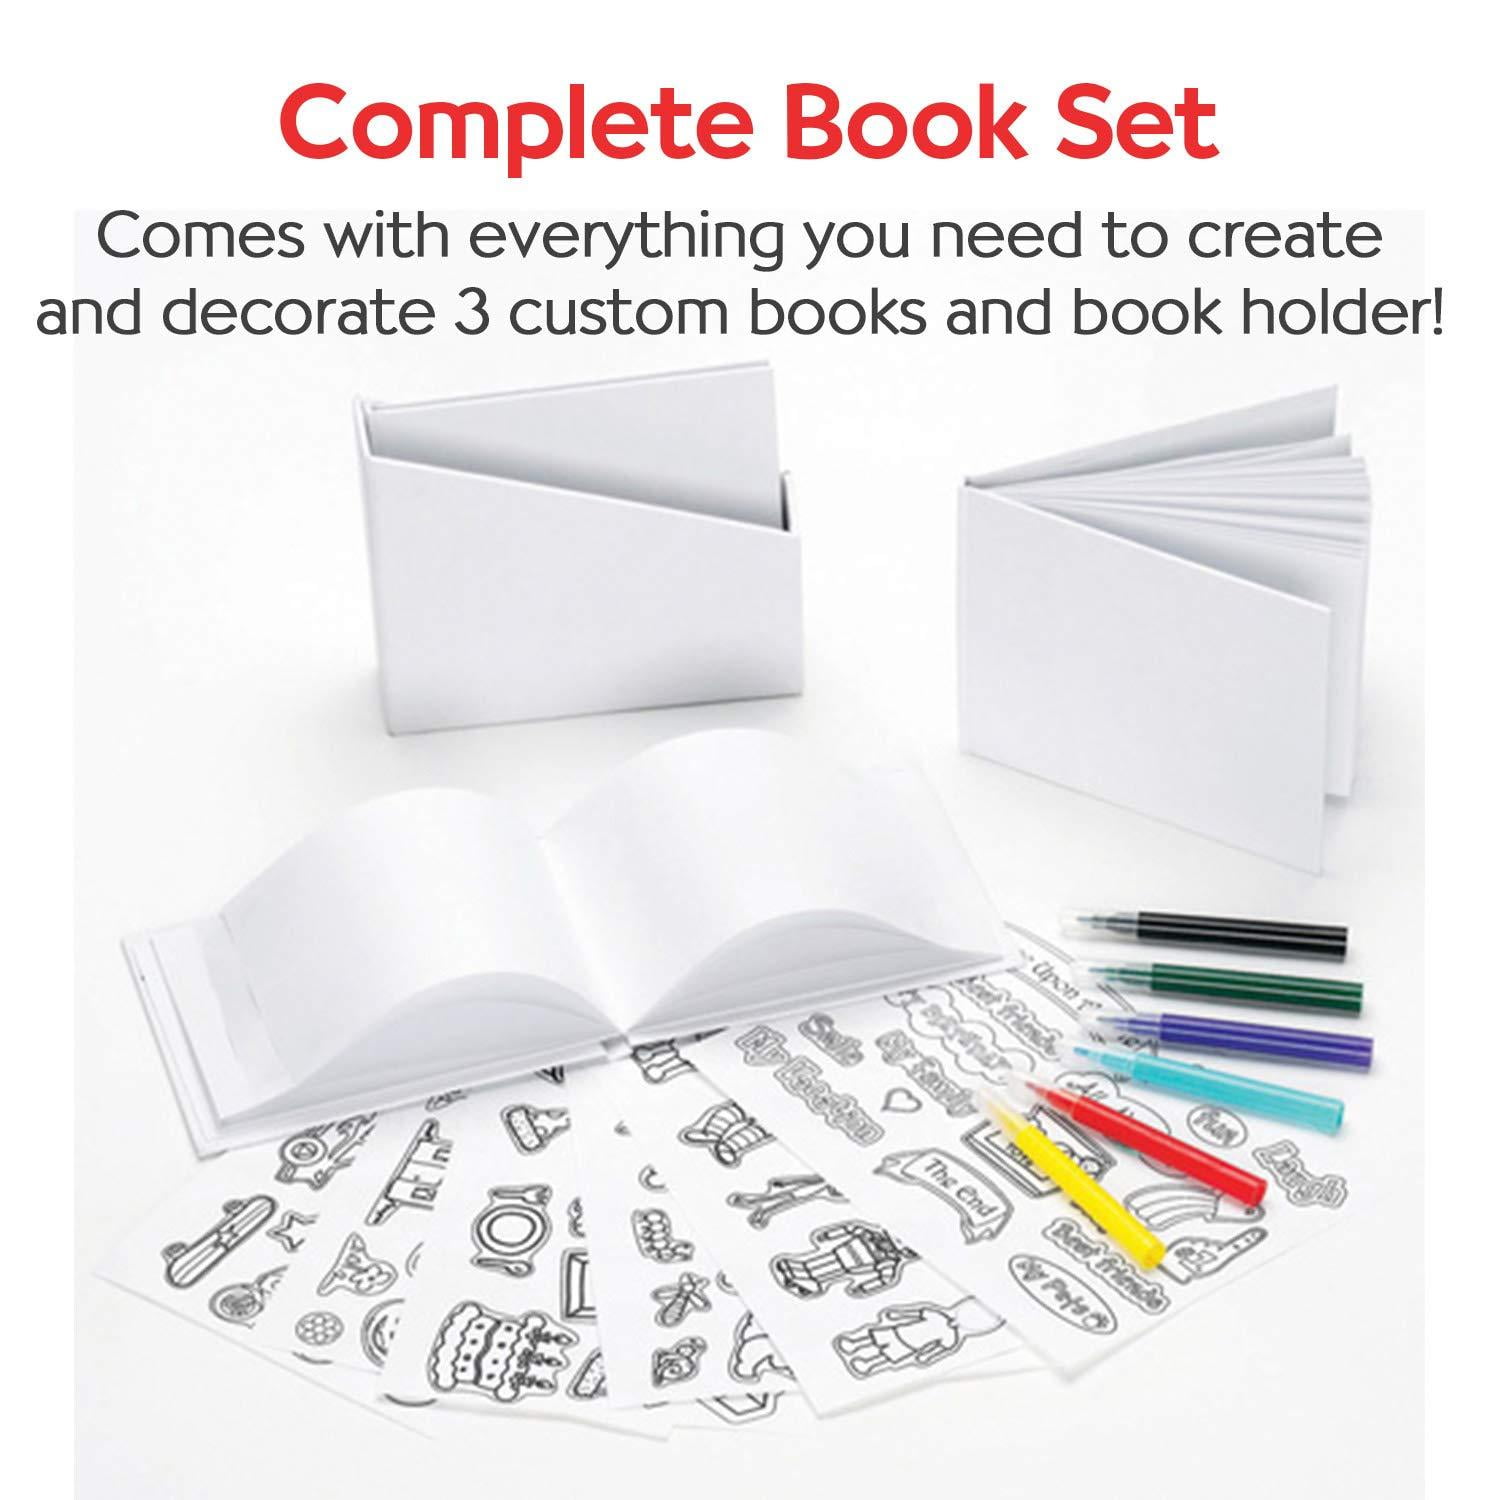 Creativity for Kids Create Your Own 3 Bitty Books